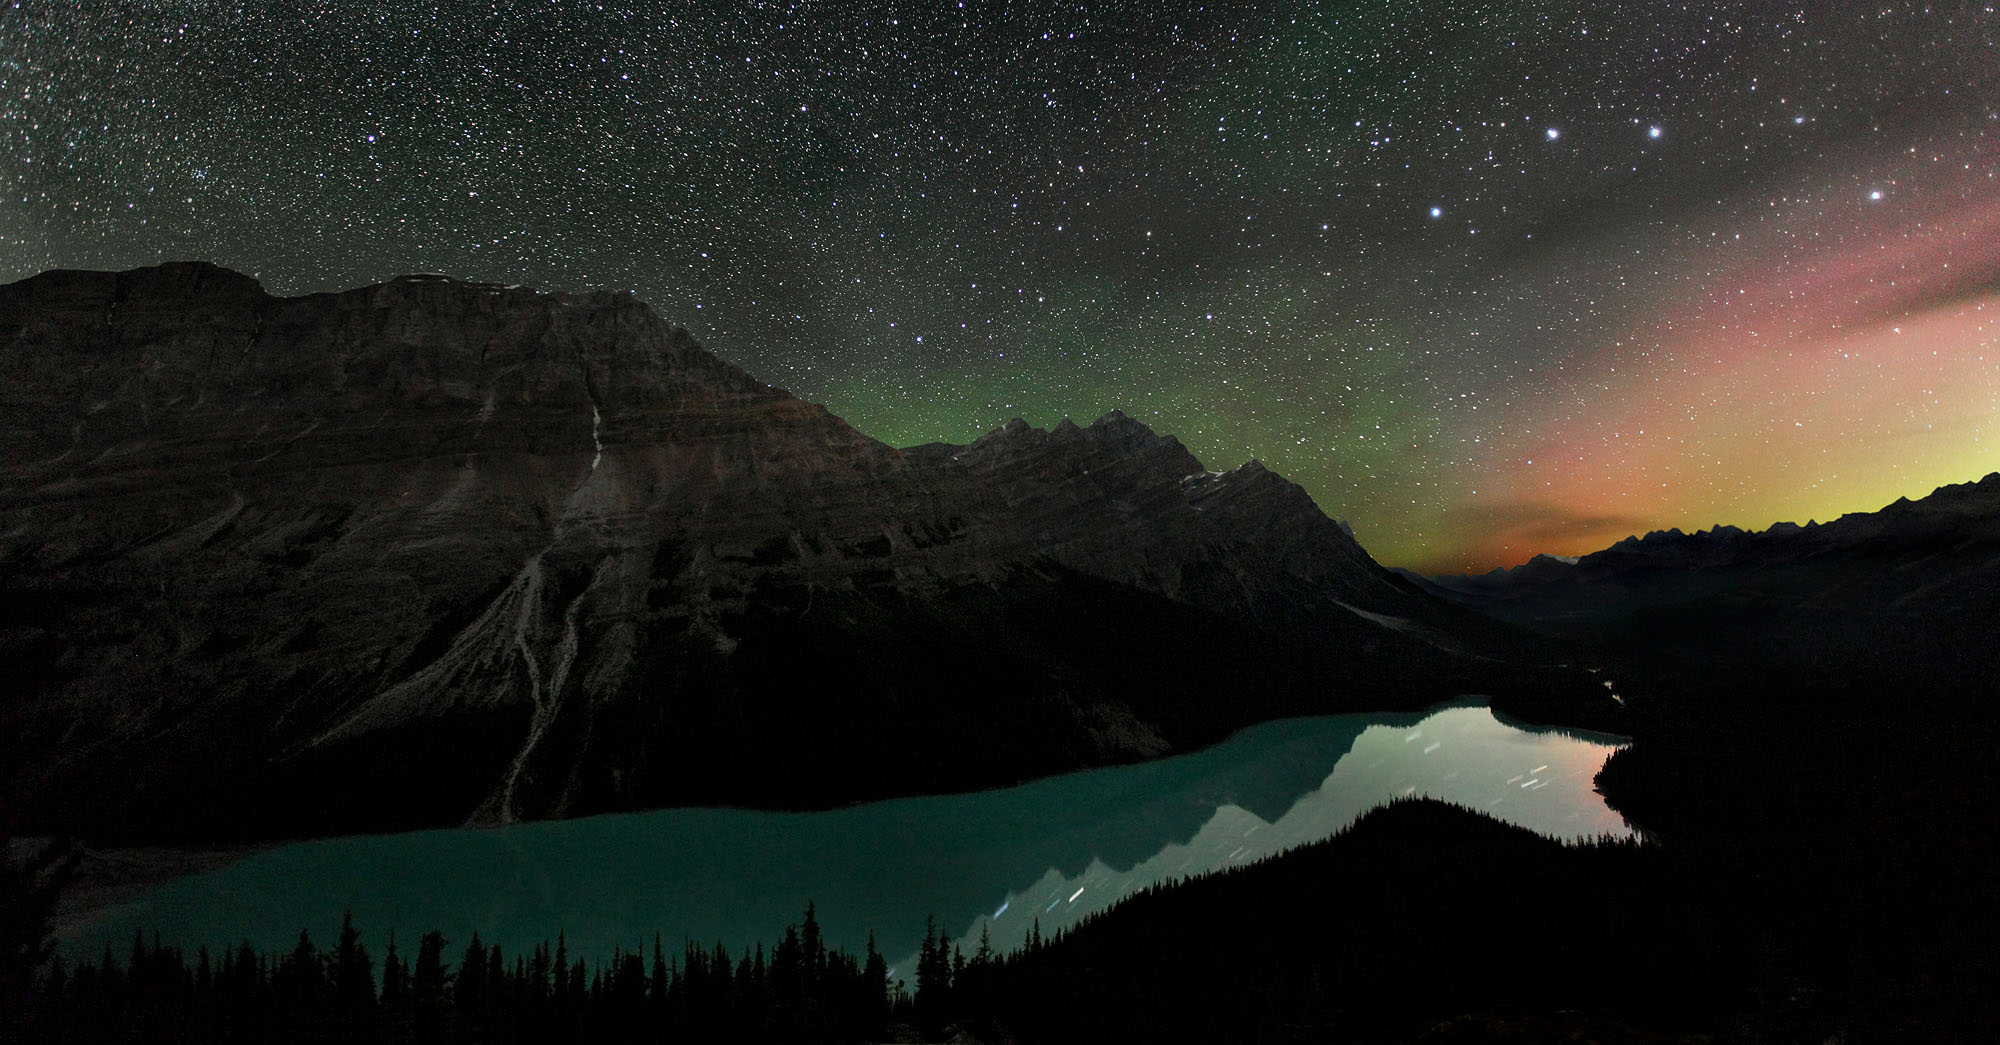 Red and green northern lights with the starry night sky over Peyto Lake in the Canadian Rocky Mountains near Banff